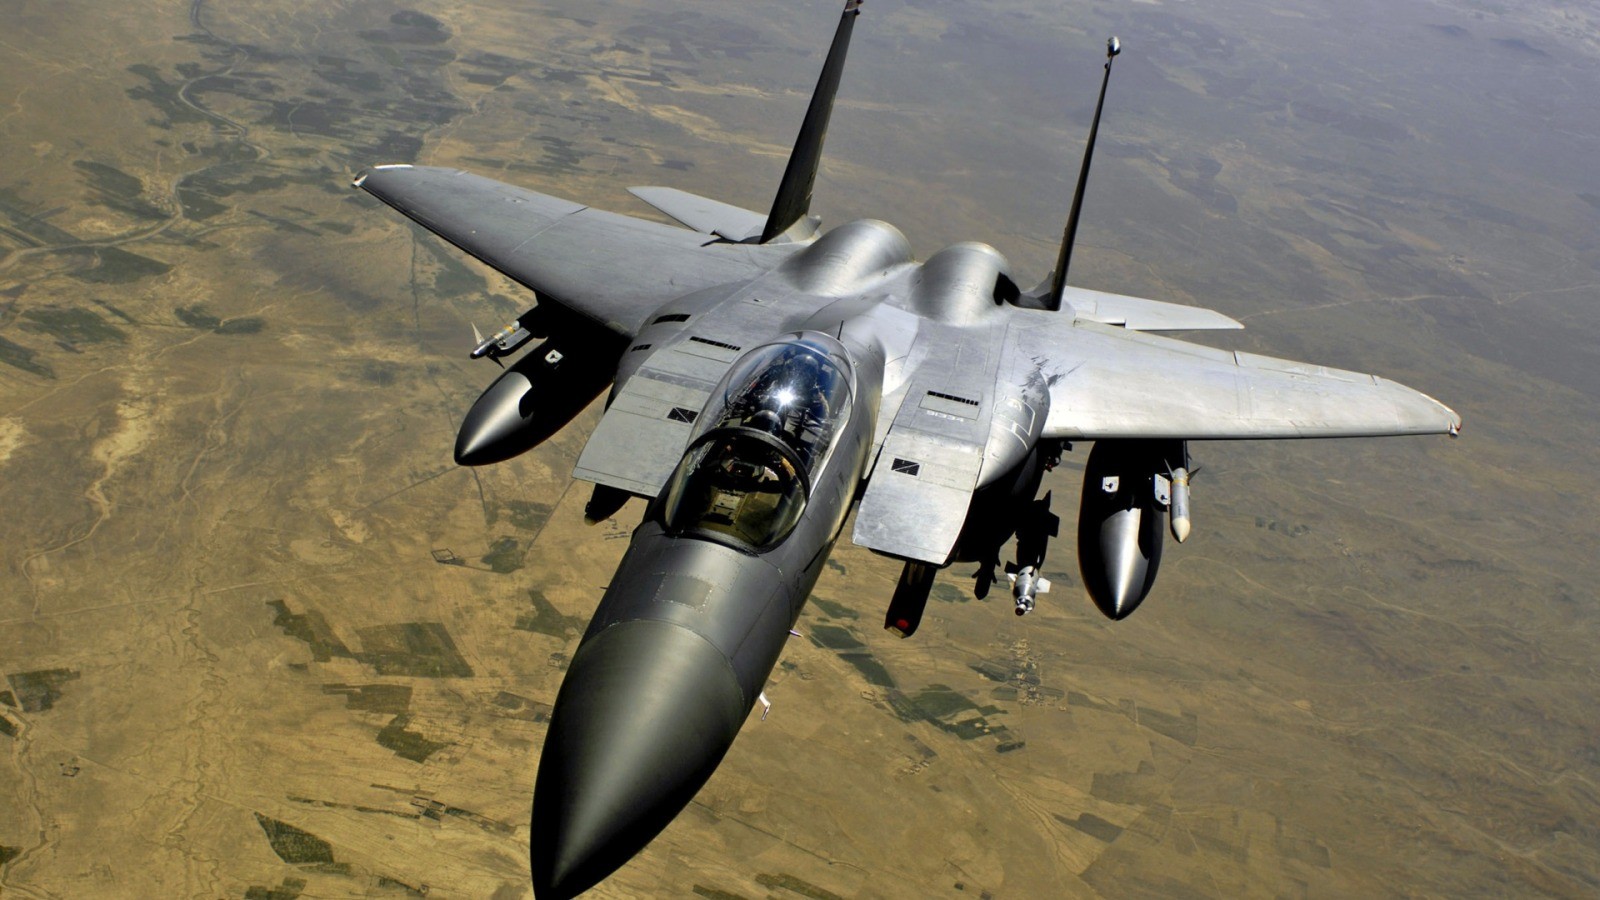 General 1600x900 jet fighter military aircraft F-15 Eagle military vehicle military vehicle aircraft American aircraft McDonnell Douglas pilot frontal view landscape